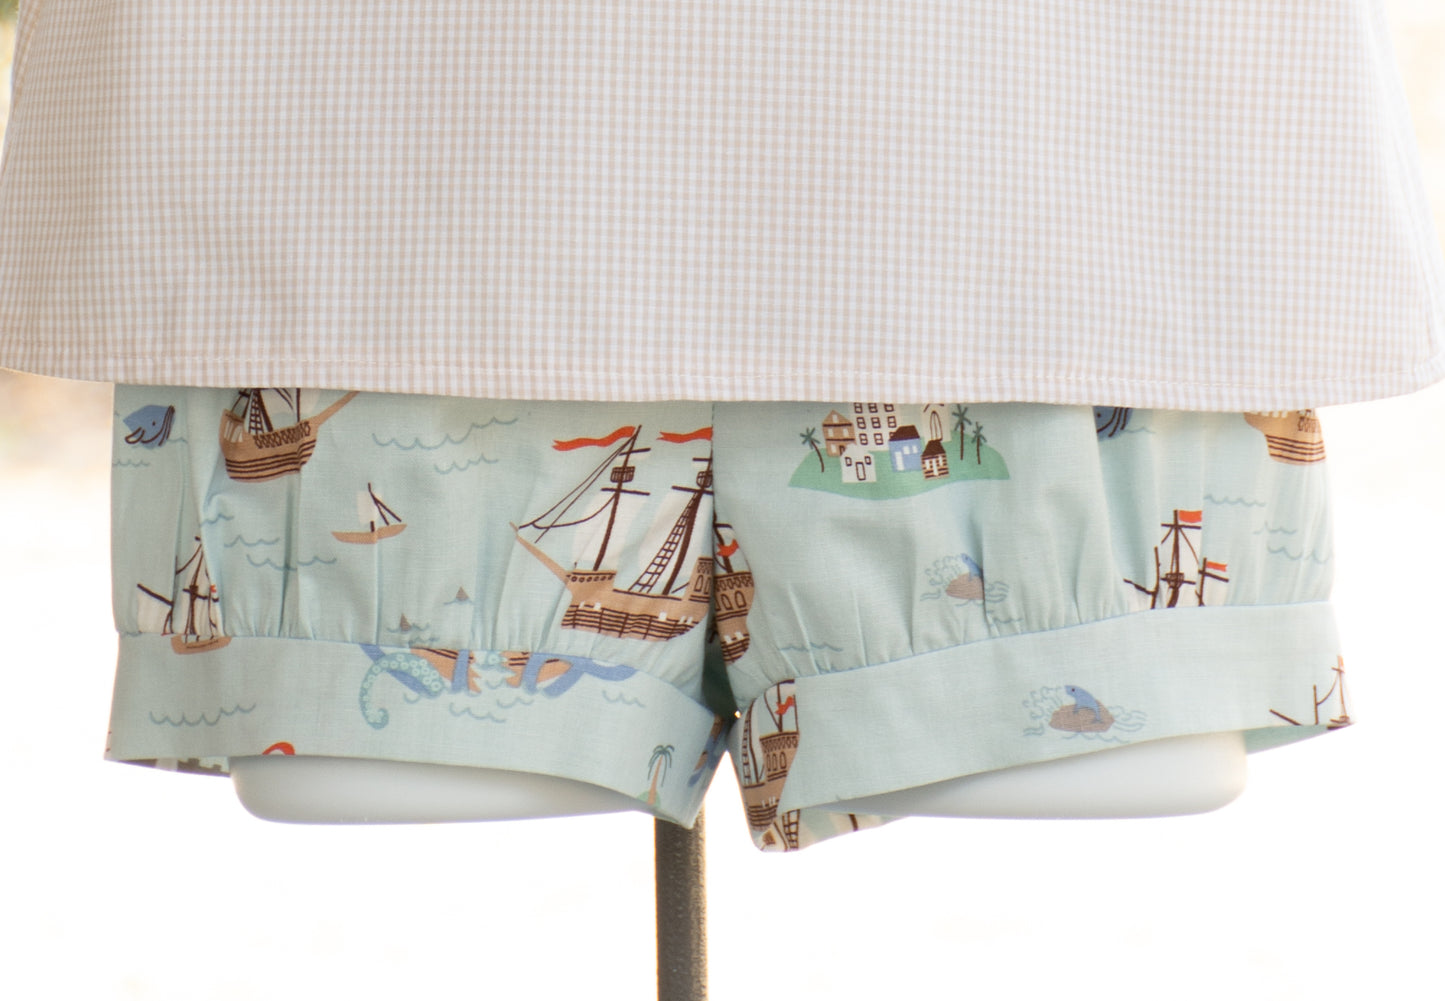 Pirate banded shorts